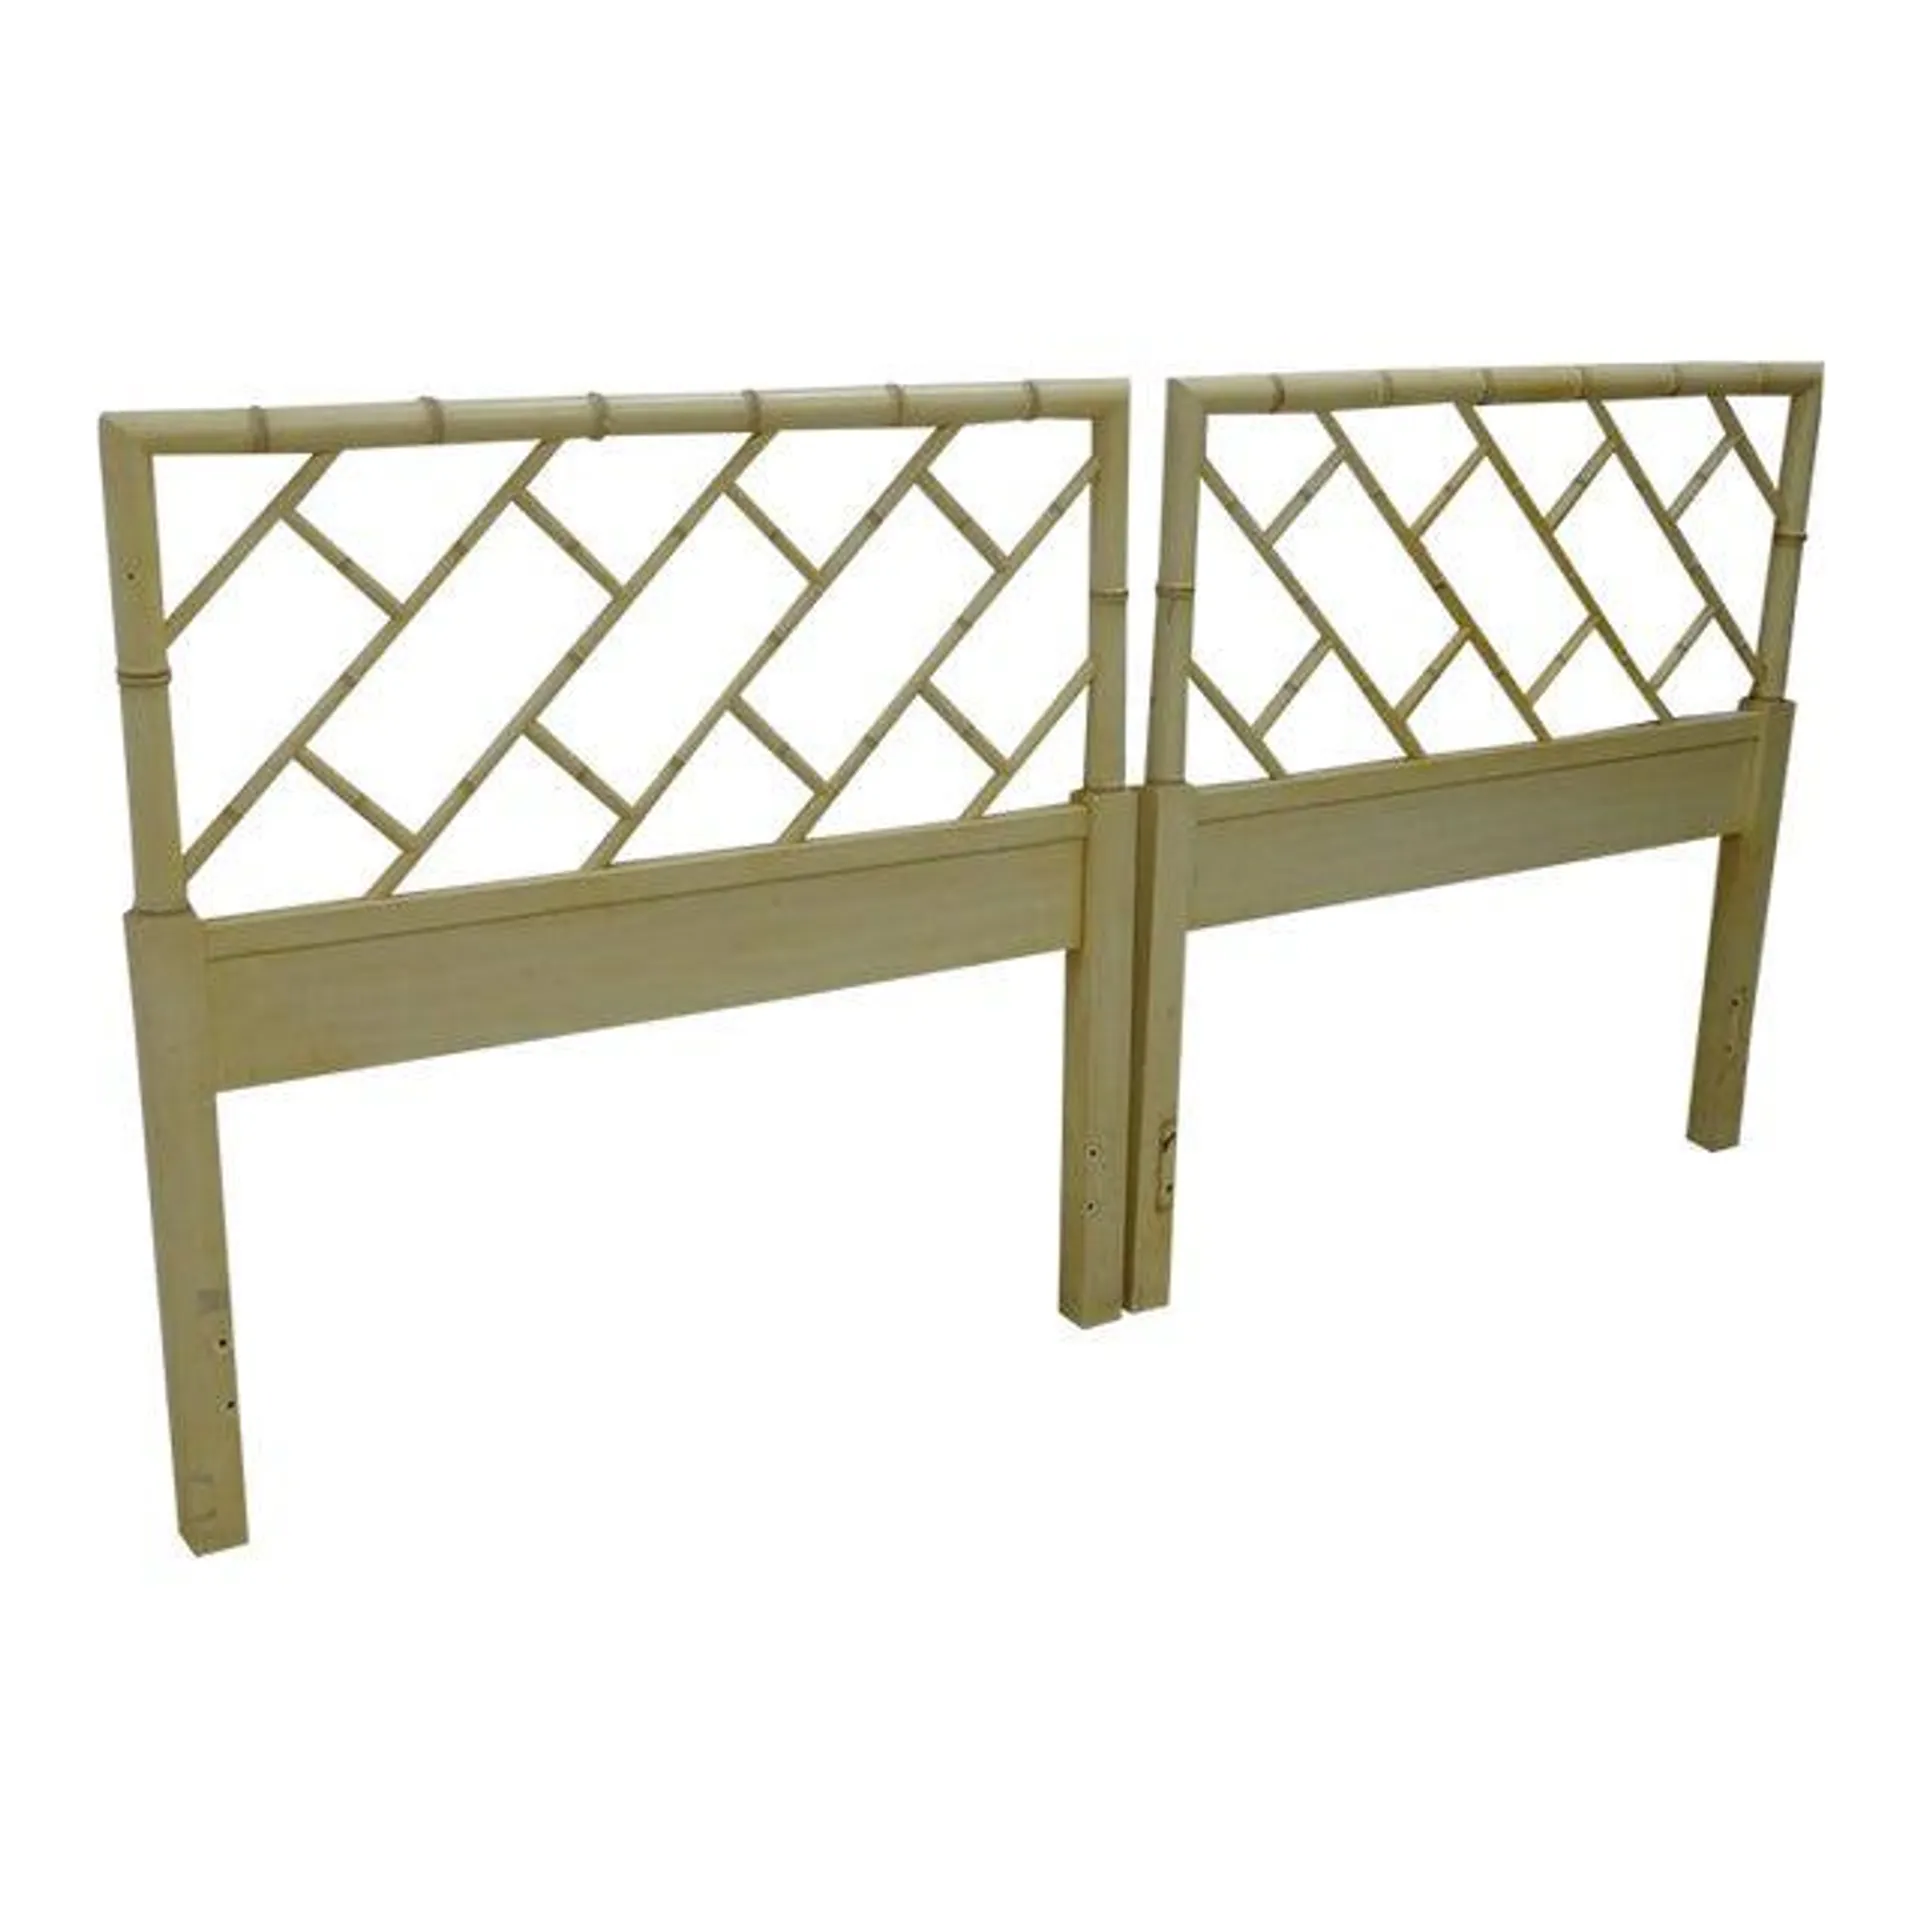 Faux Bamboo Chippendale Twin Headboards - A Pair